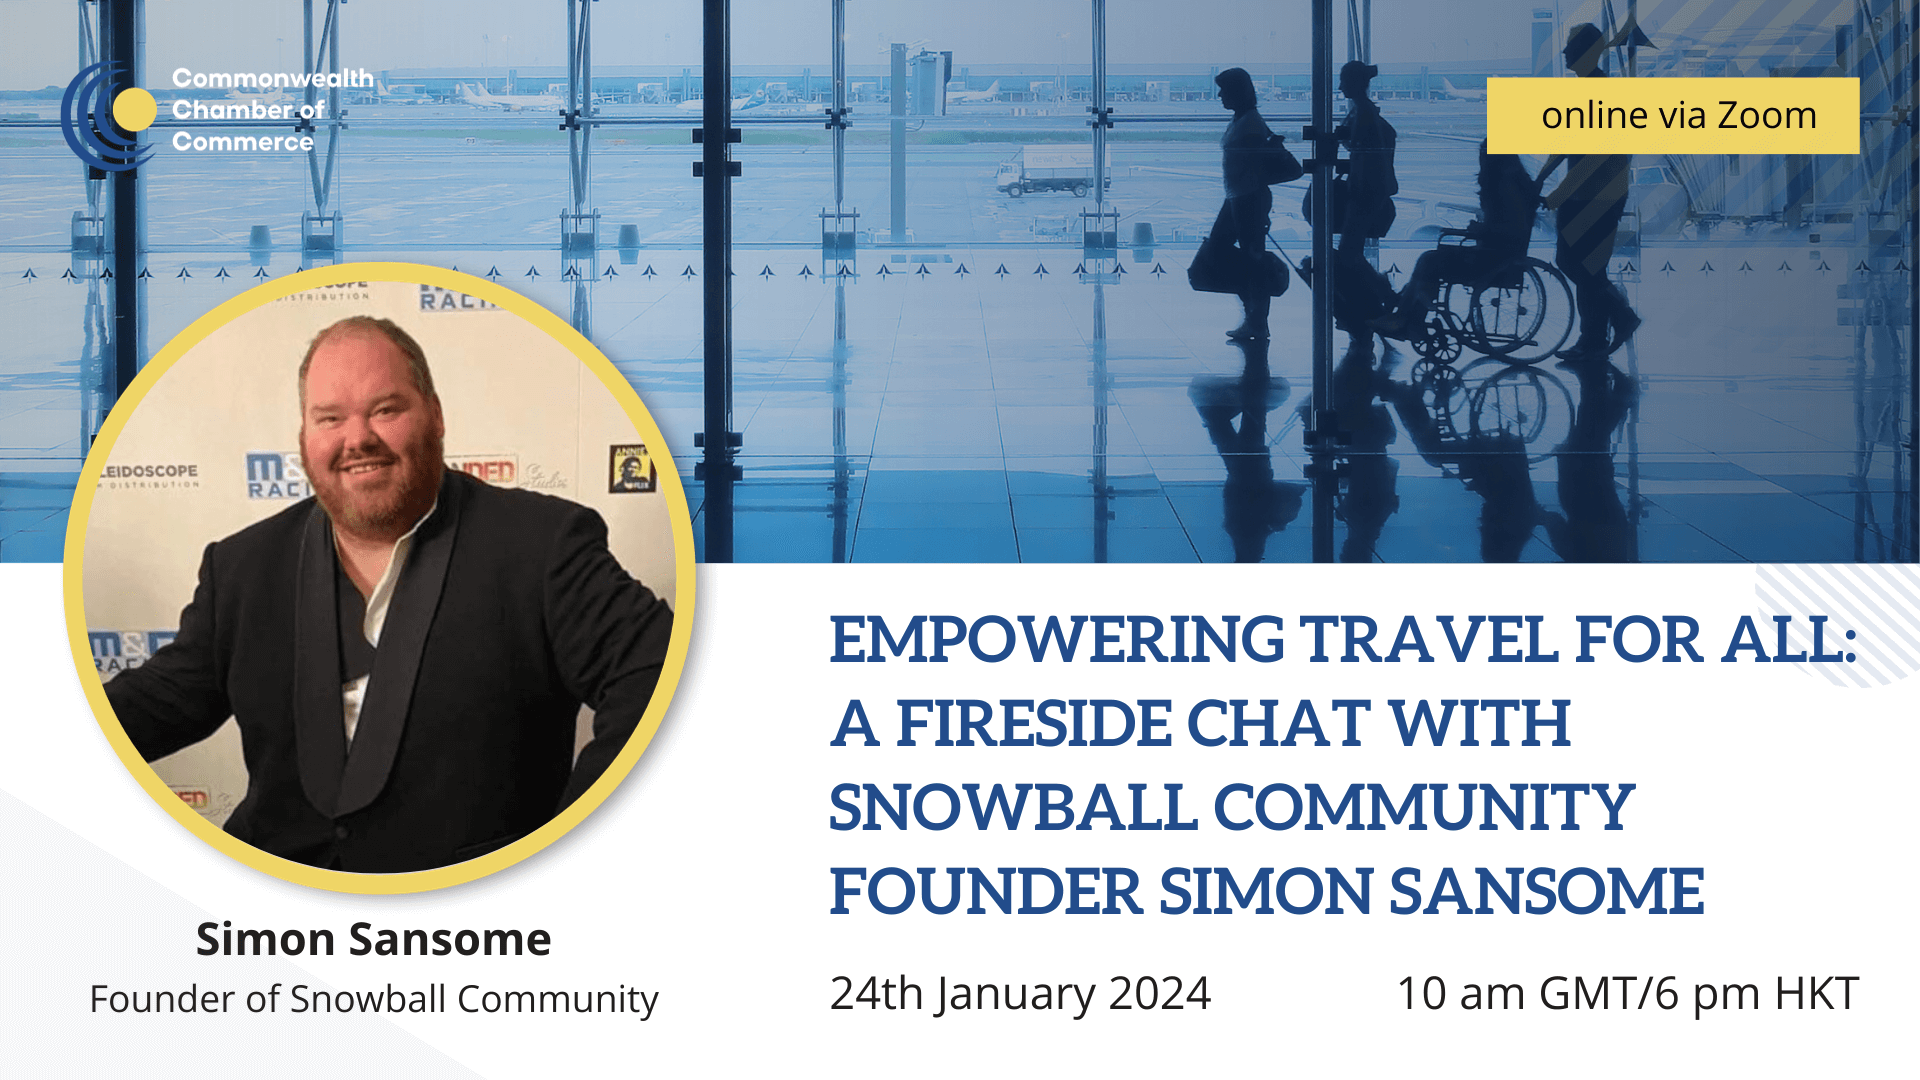 Empowering Travel for All: A Fireside Chat with Snowball Community Founder Simon Sansome